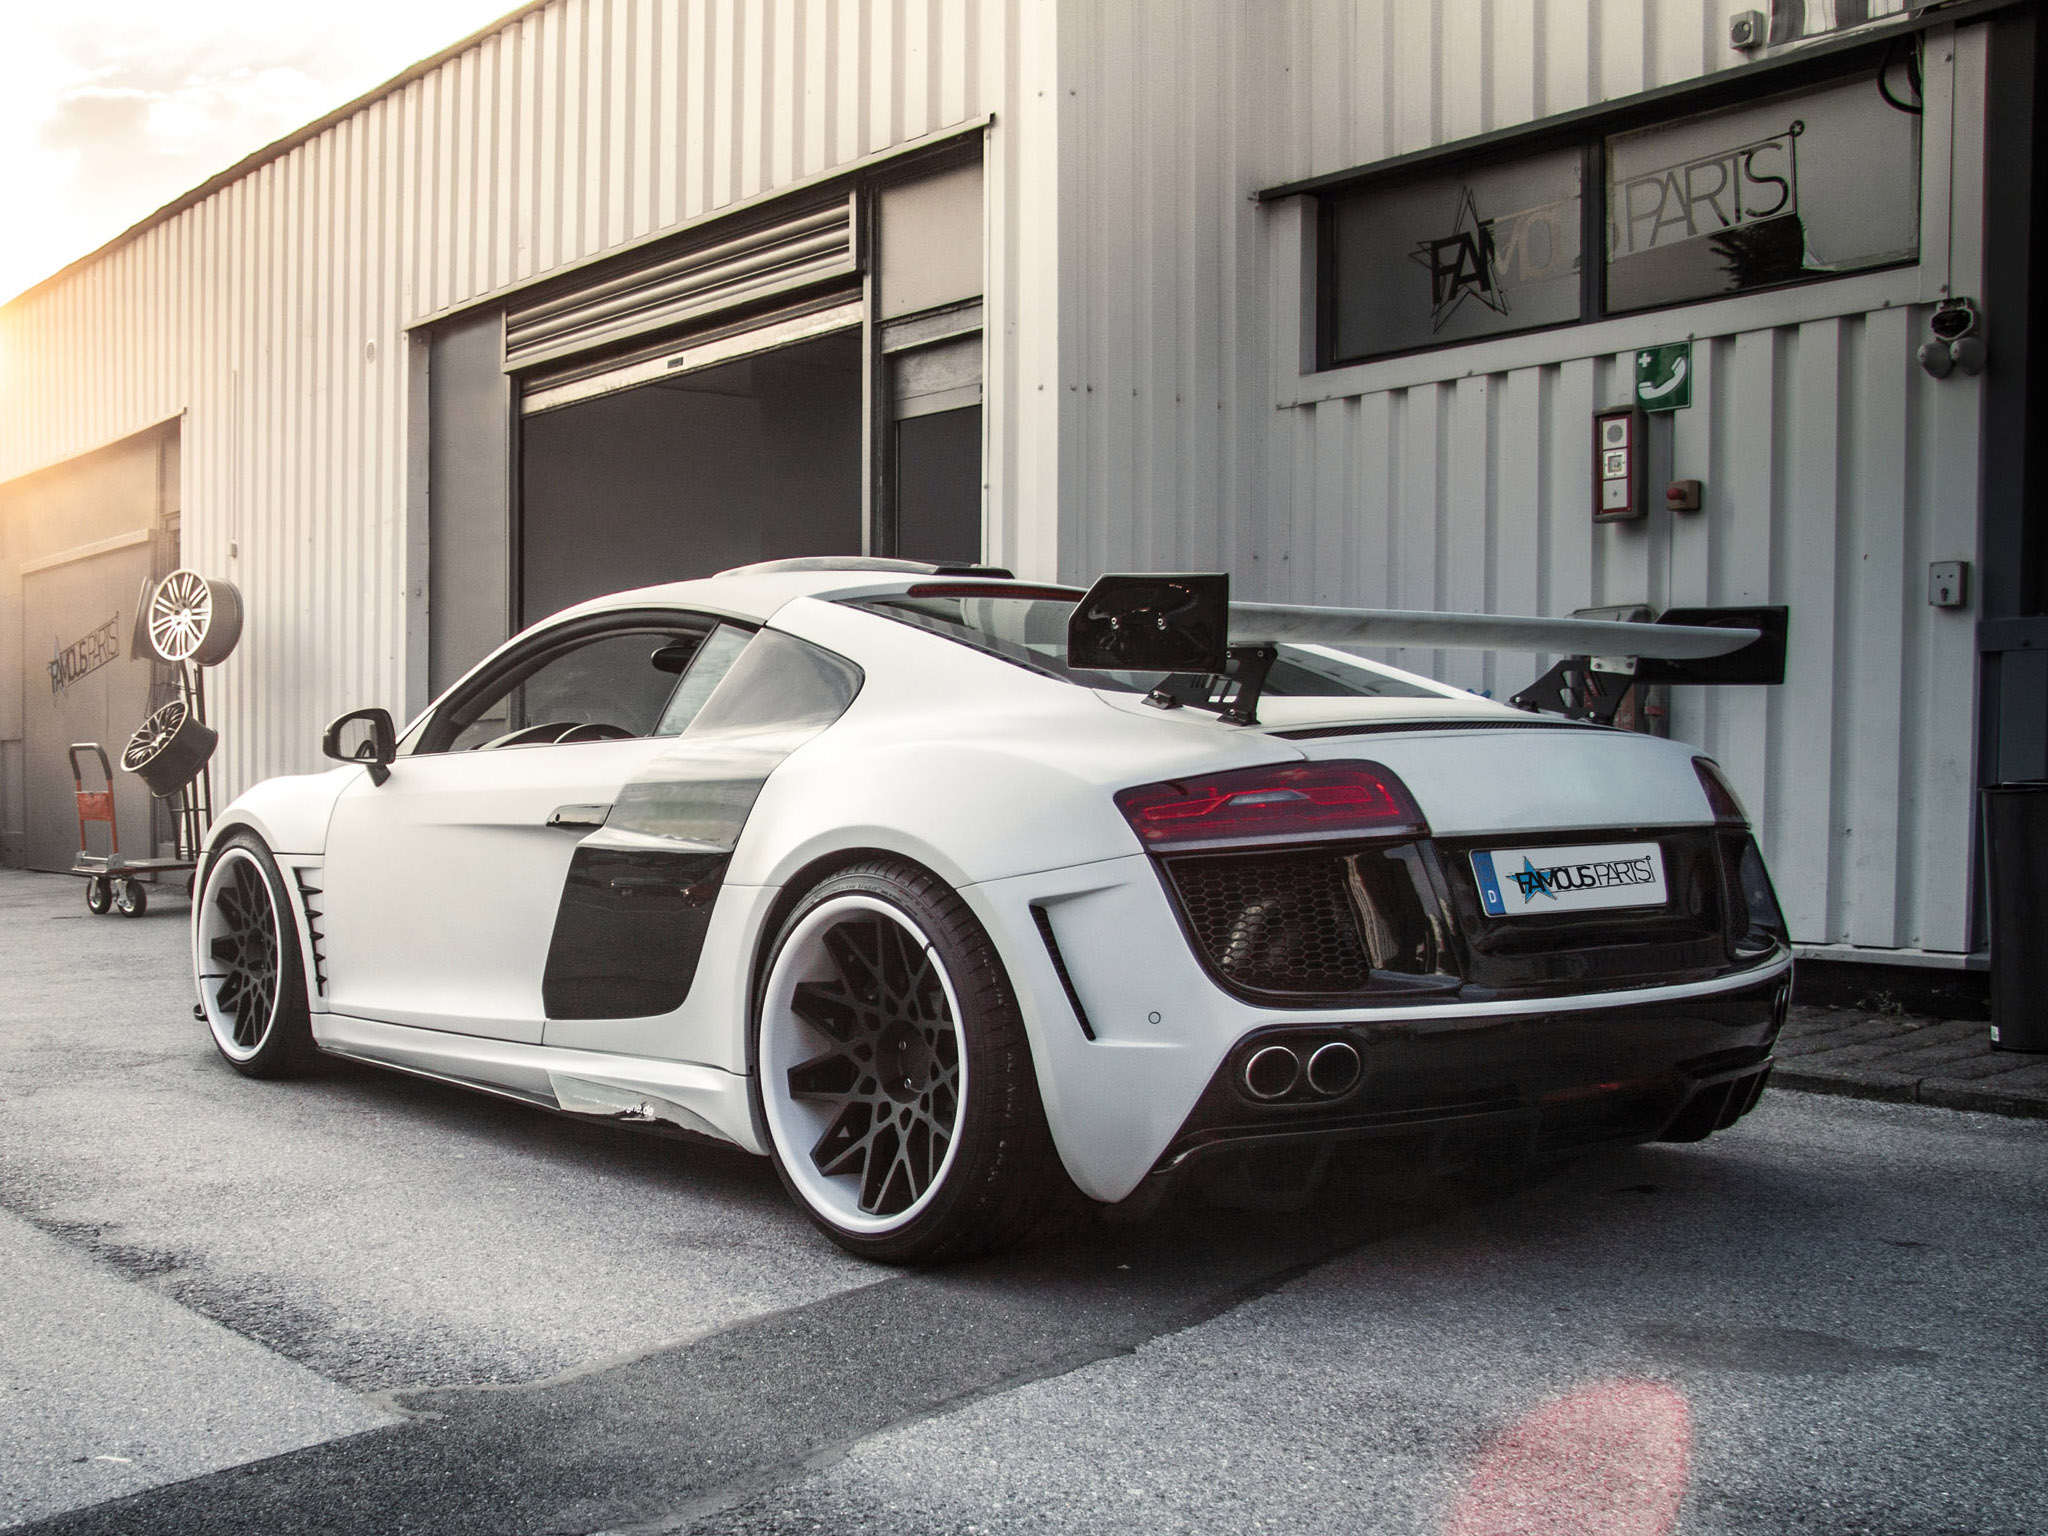 2013, Audi, R8, Gt, Wide, Body, Pd 850, Supercar, Supercars, Tuning, G t, R 8, Fs Wallpaper